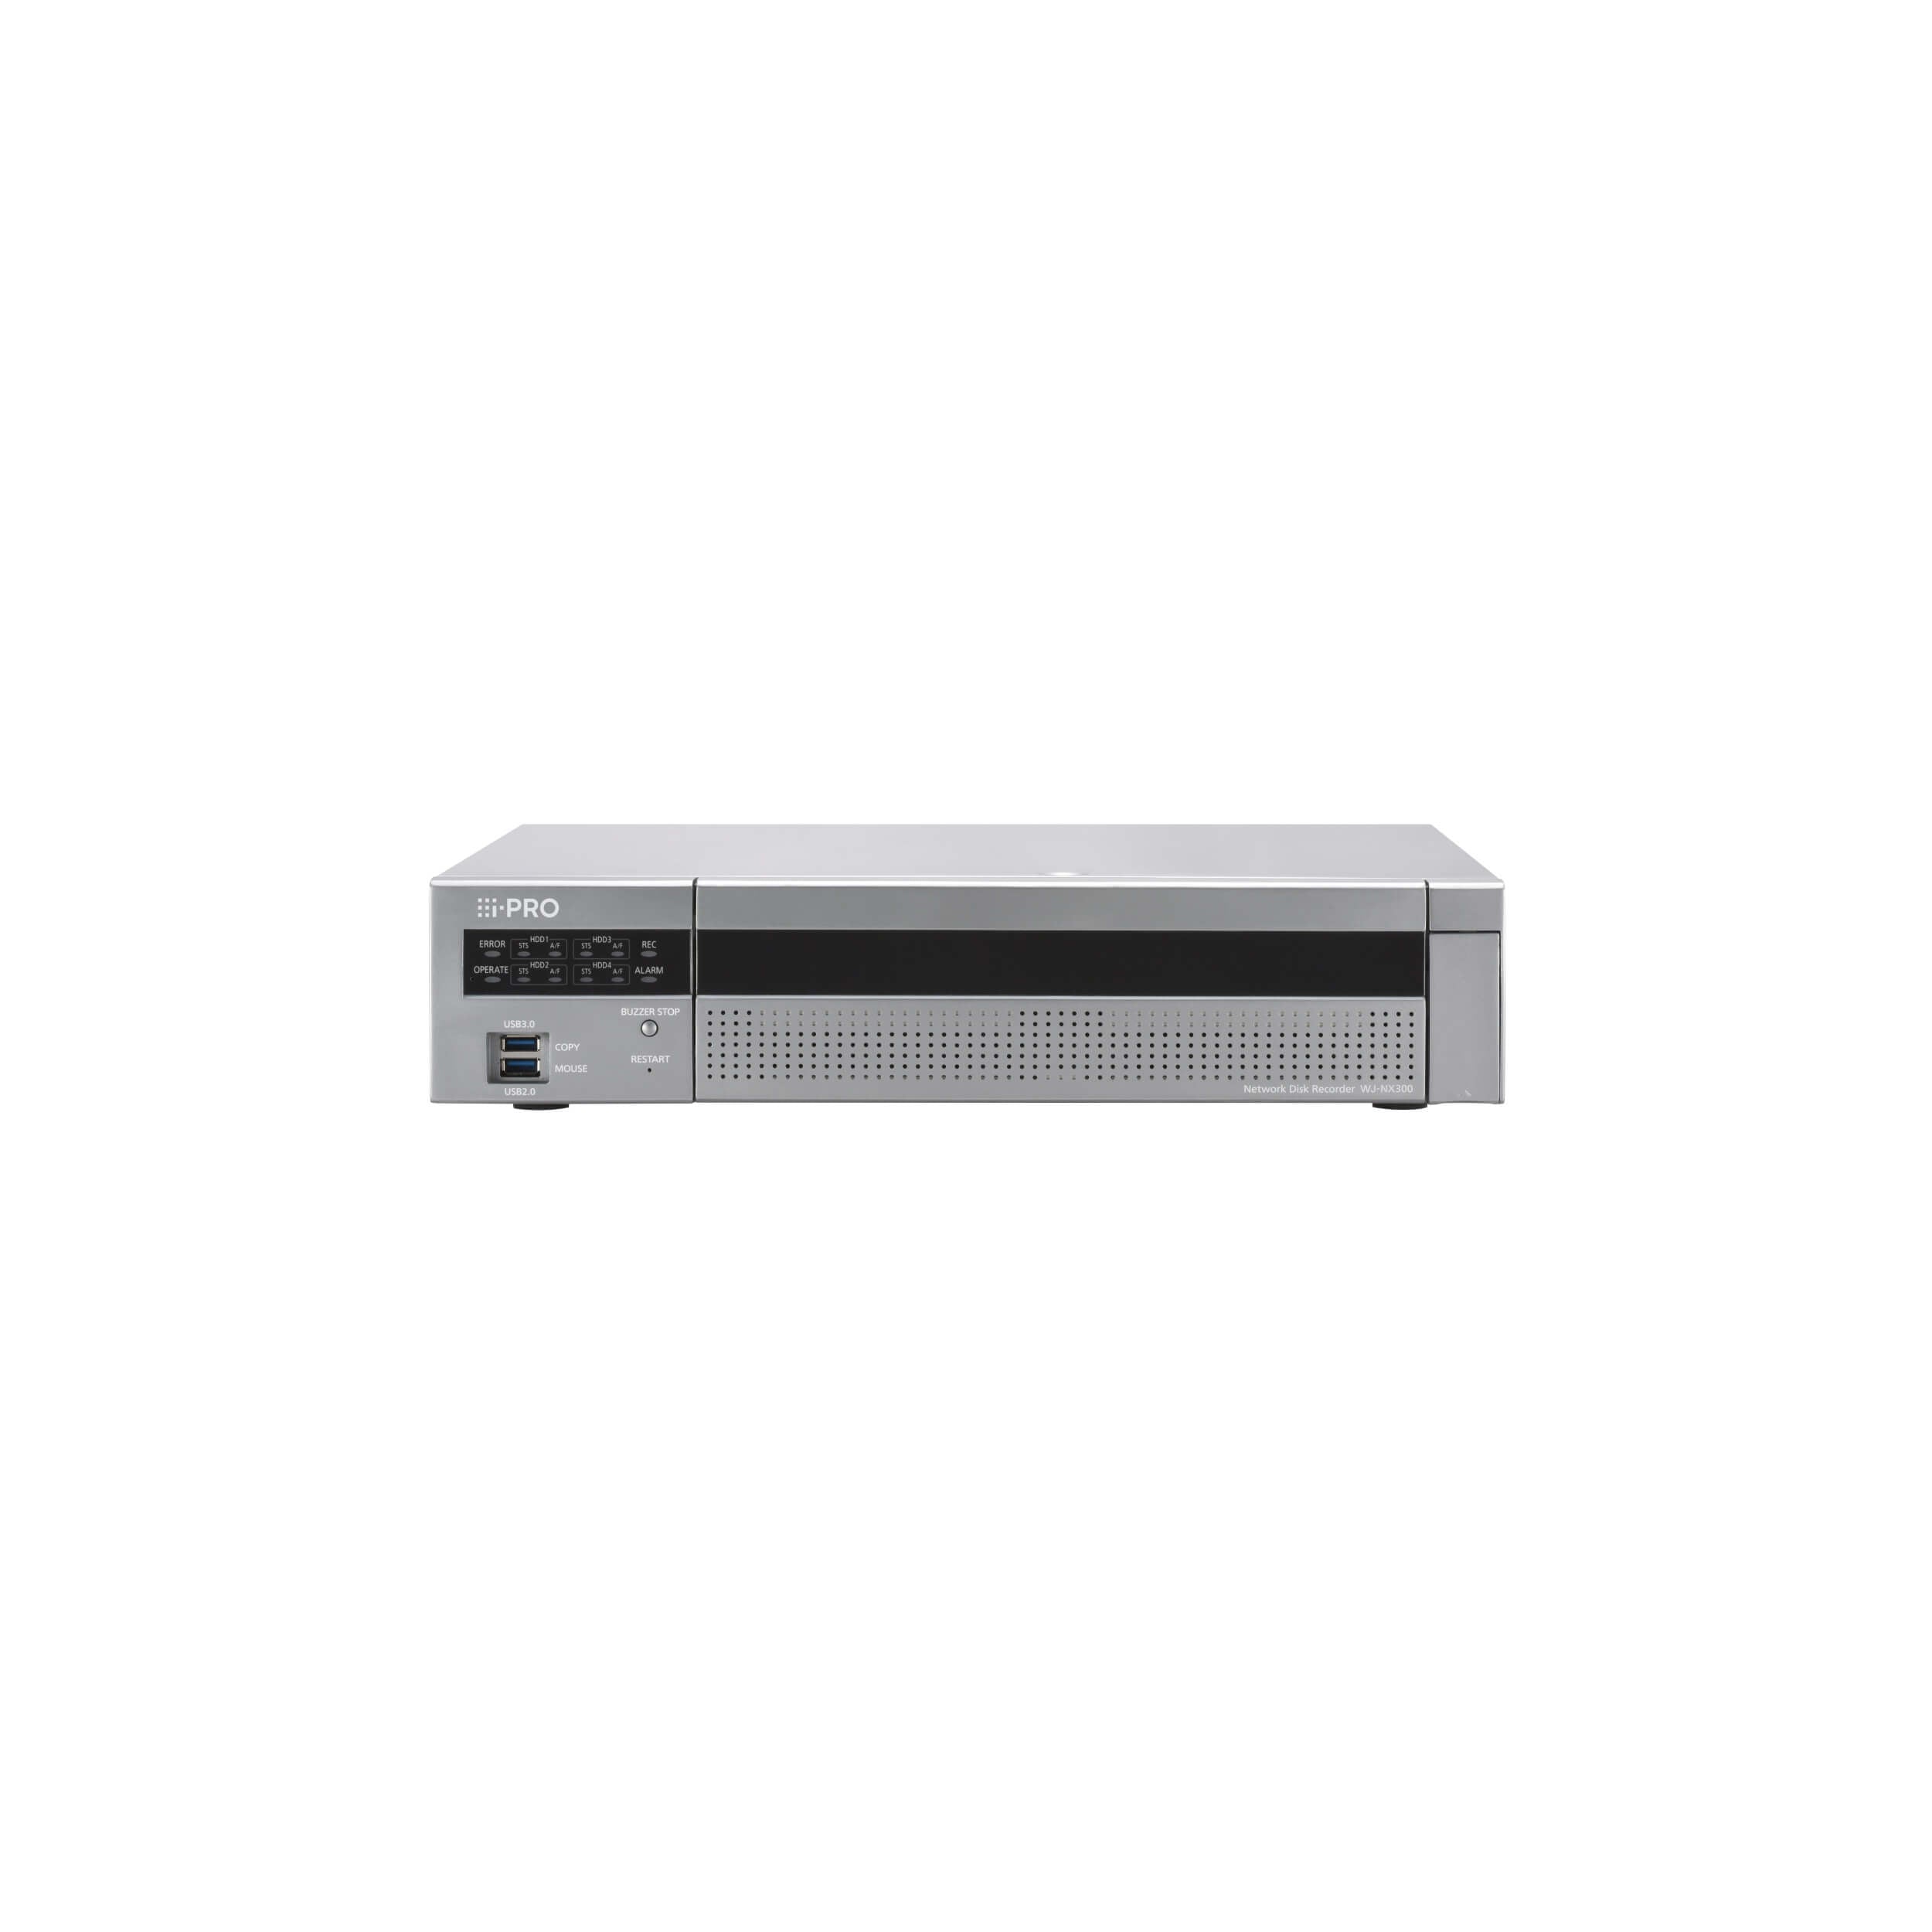 i-PRO WJ-NX300 Series H.265/H.264 Embedded Network Video Recorders